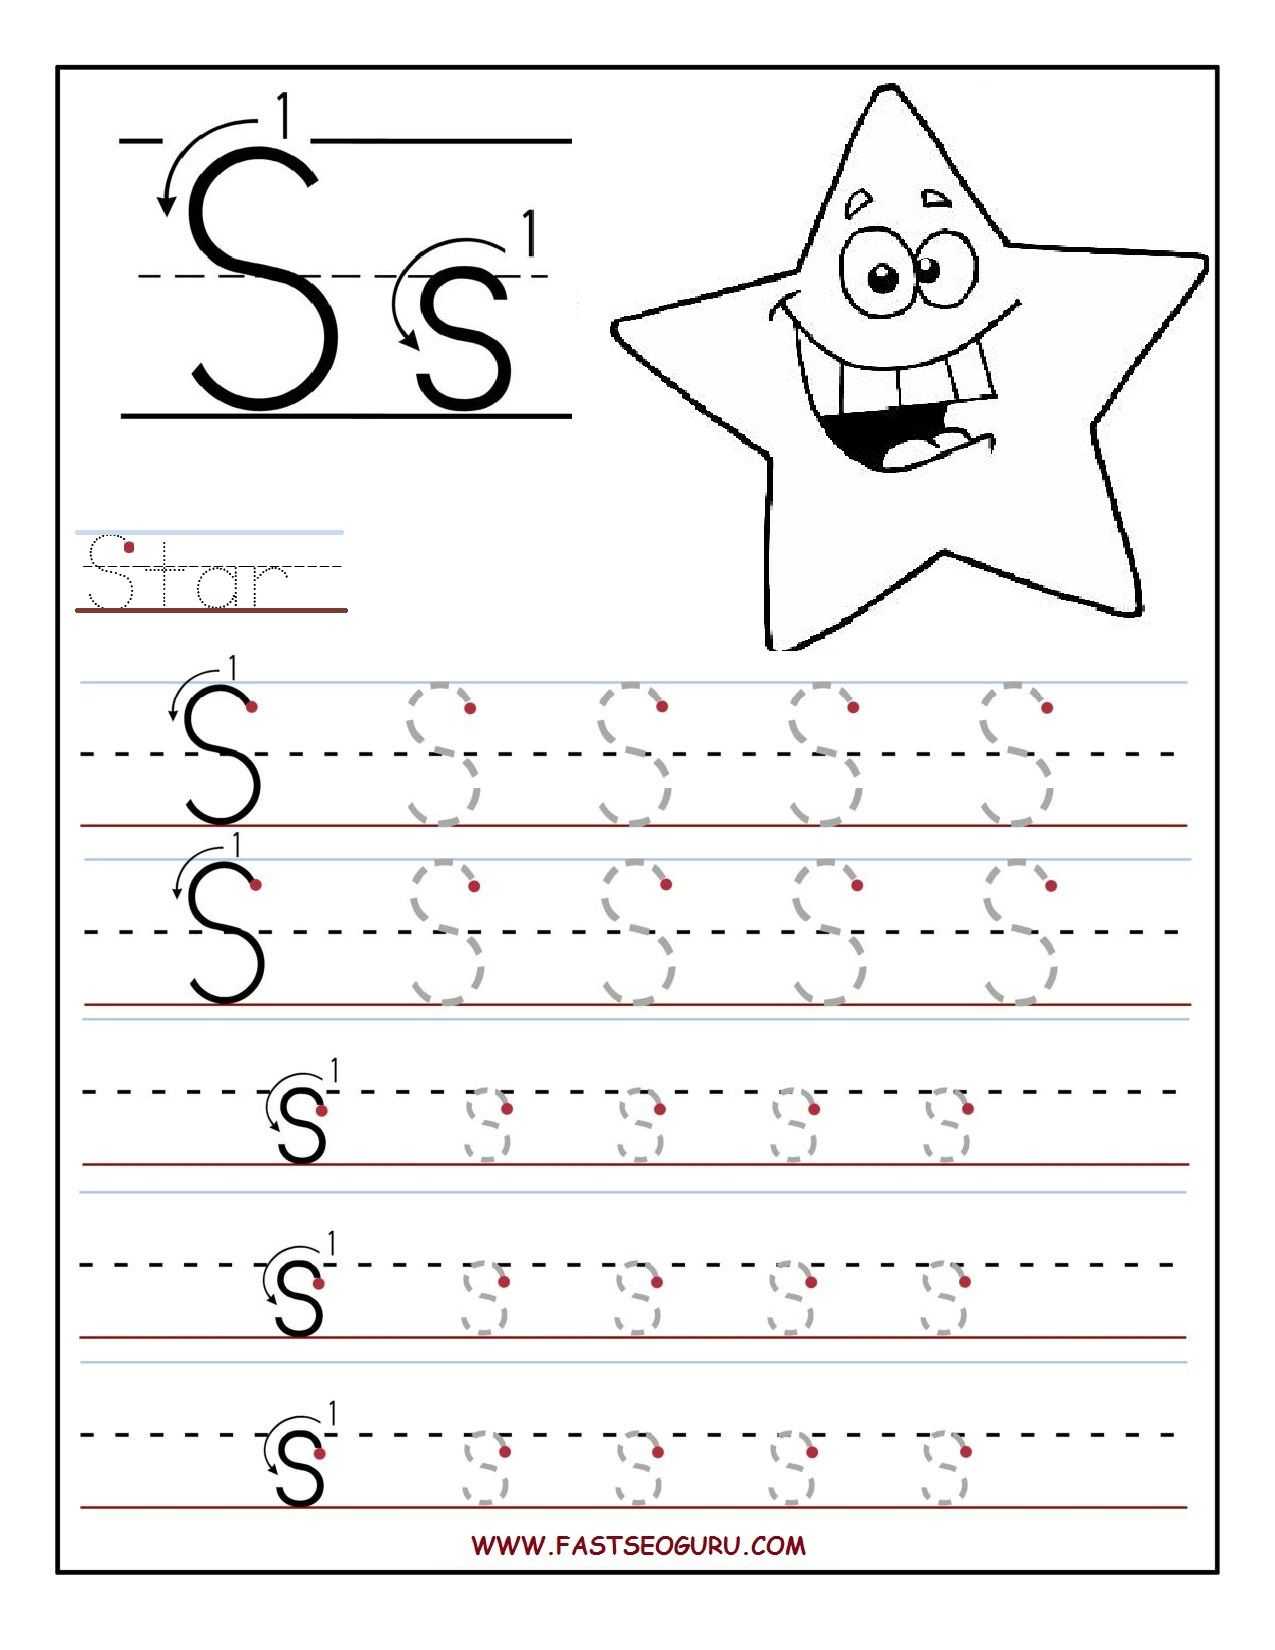 Arithmetic Sequence Worksheet Pdf together with Printable Letter S Tracing Worksheets for Preschool